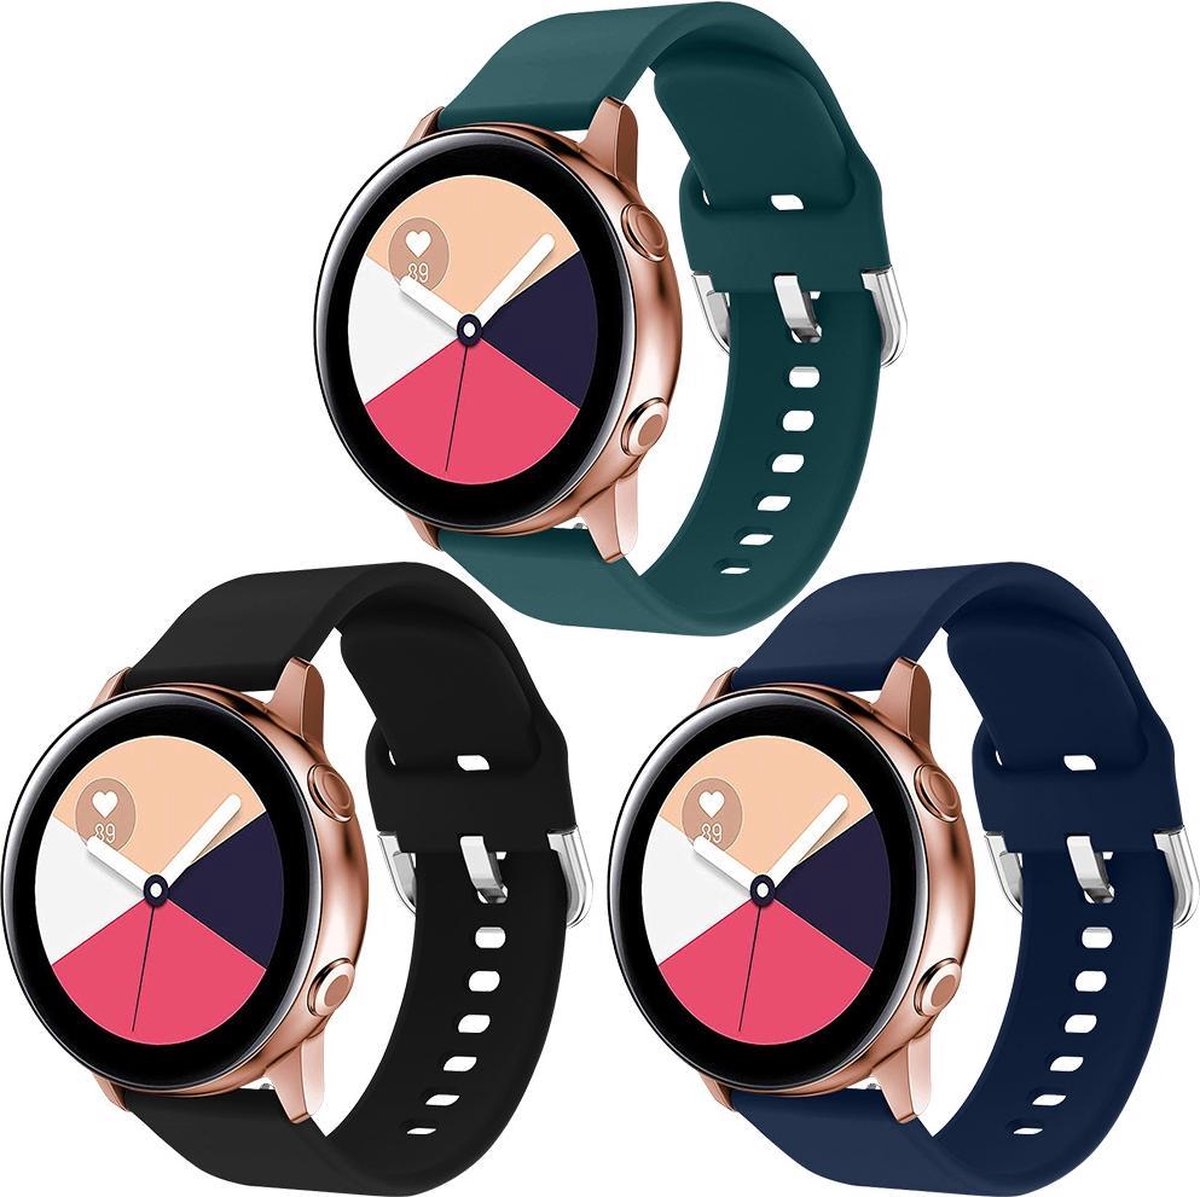 iMoshion Siliconen bandje voor 3-pack Galaxy Watch 40/42mm / Active 2 42/44mm / Watch 3 41mm - iMoshion